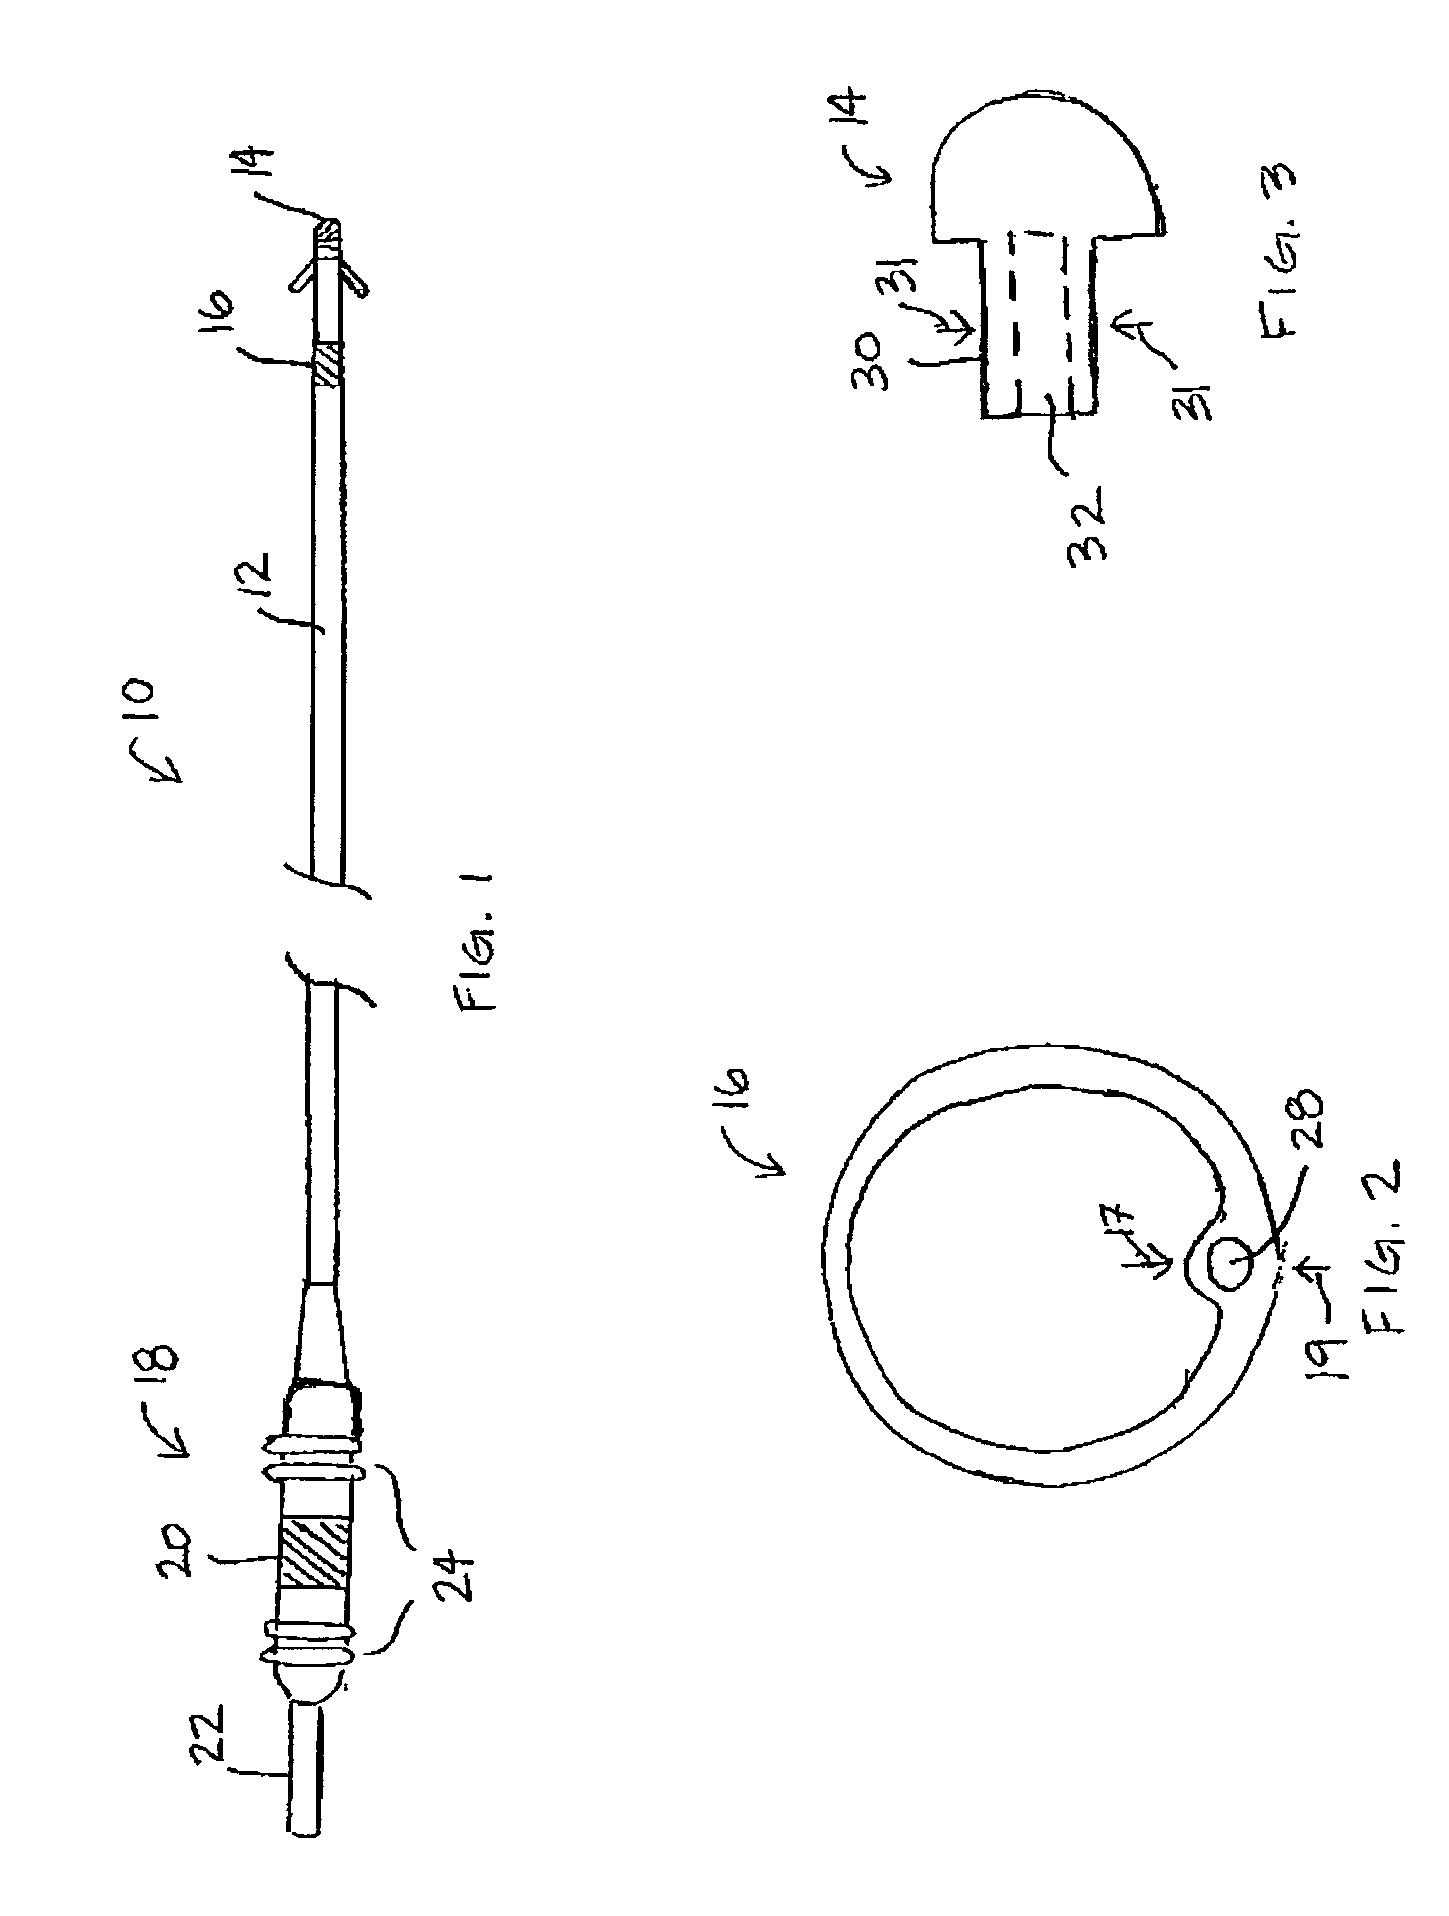 Methods and apparatus for joining small diameter conductors within medical electrical leads